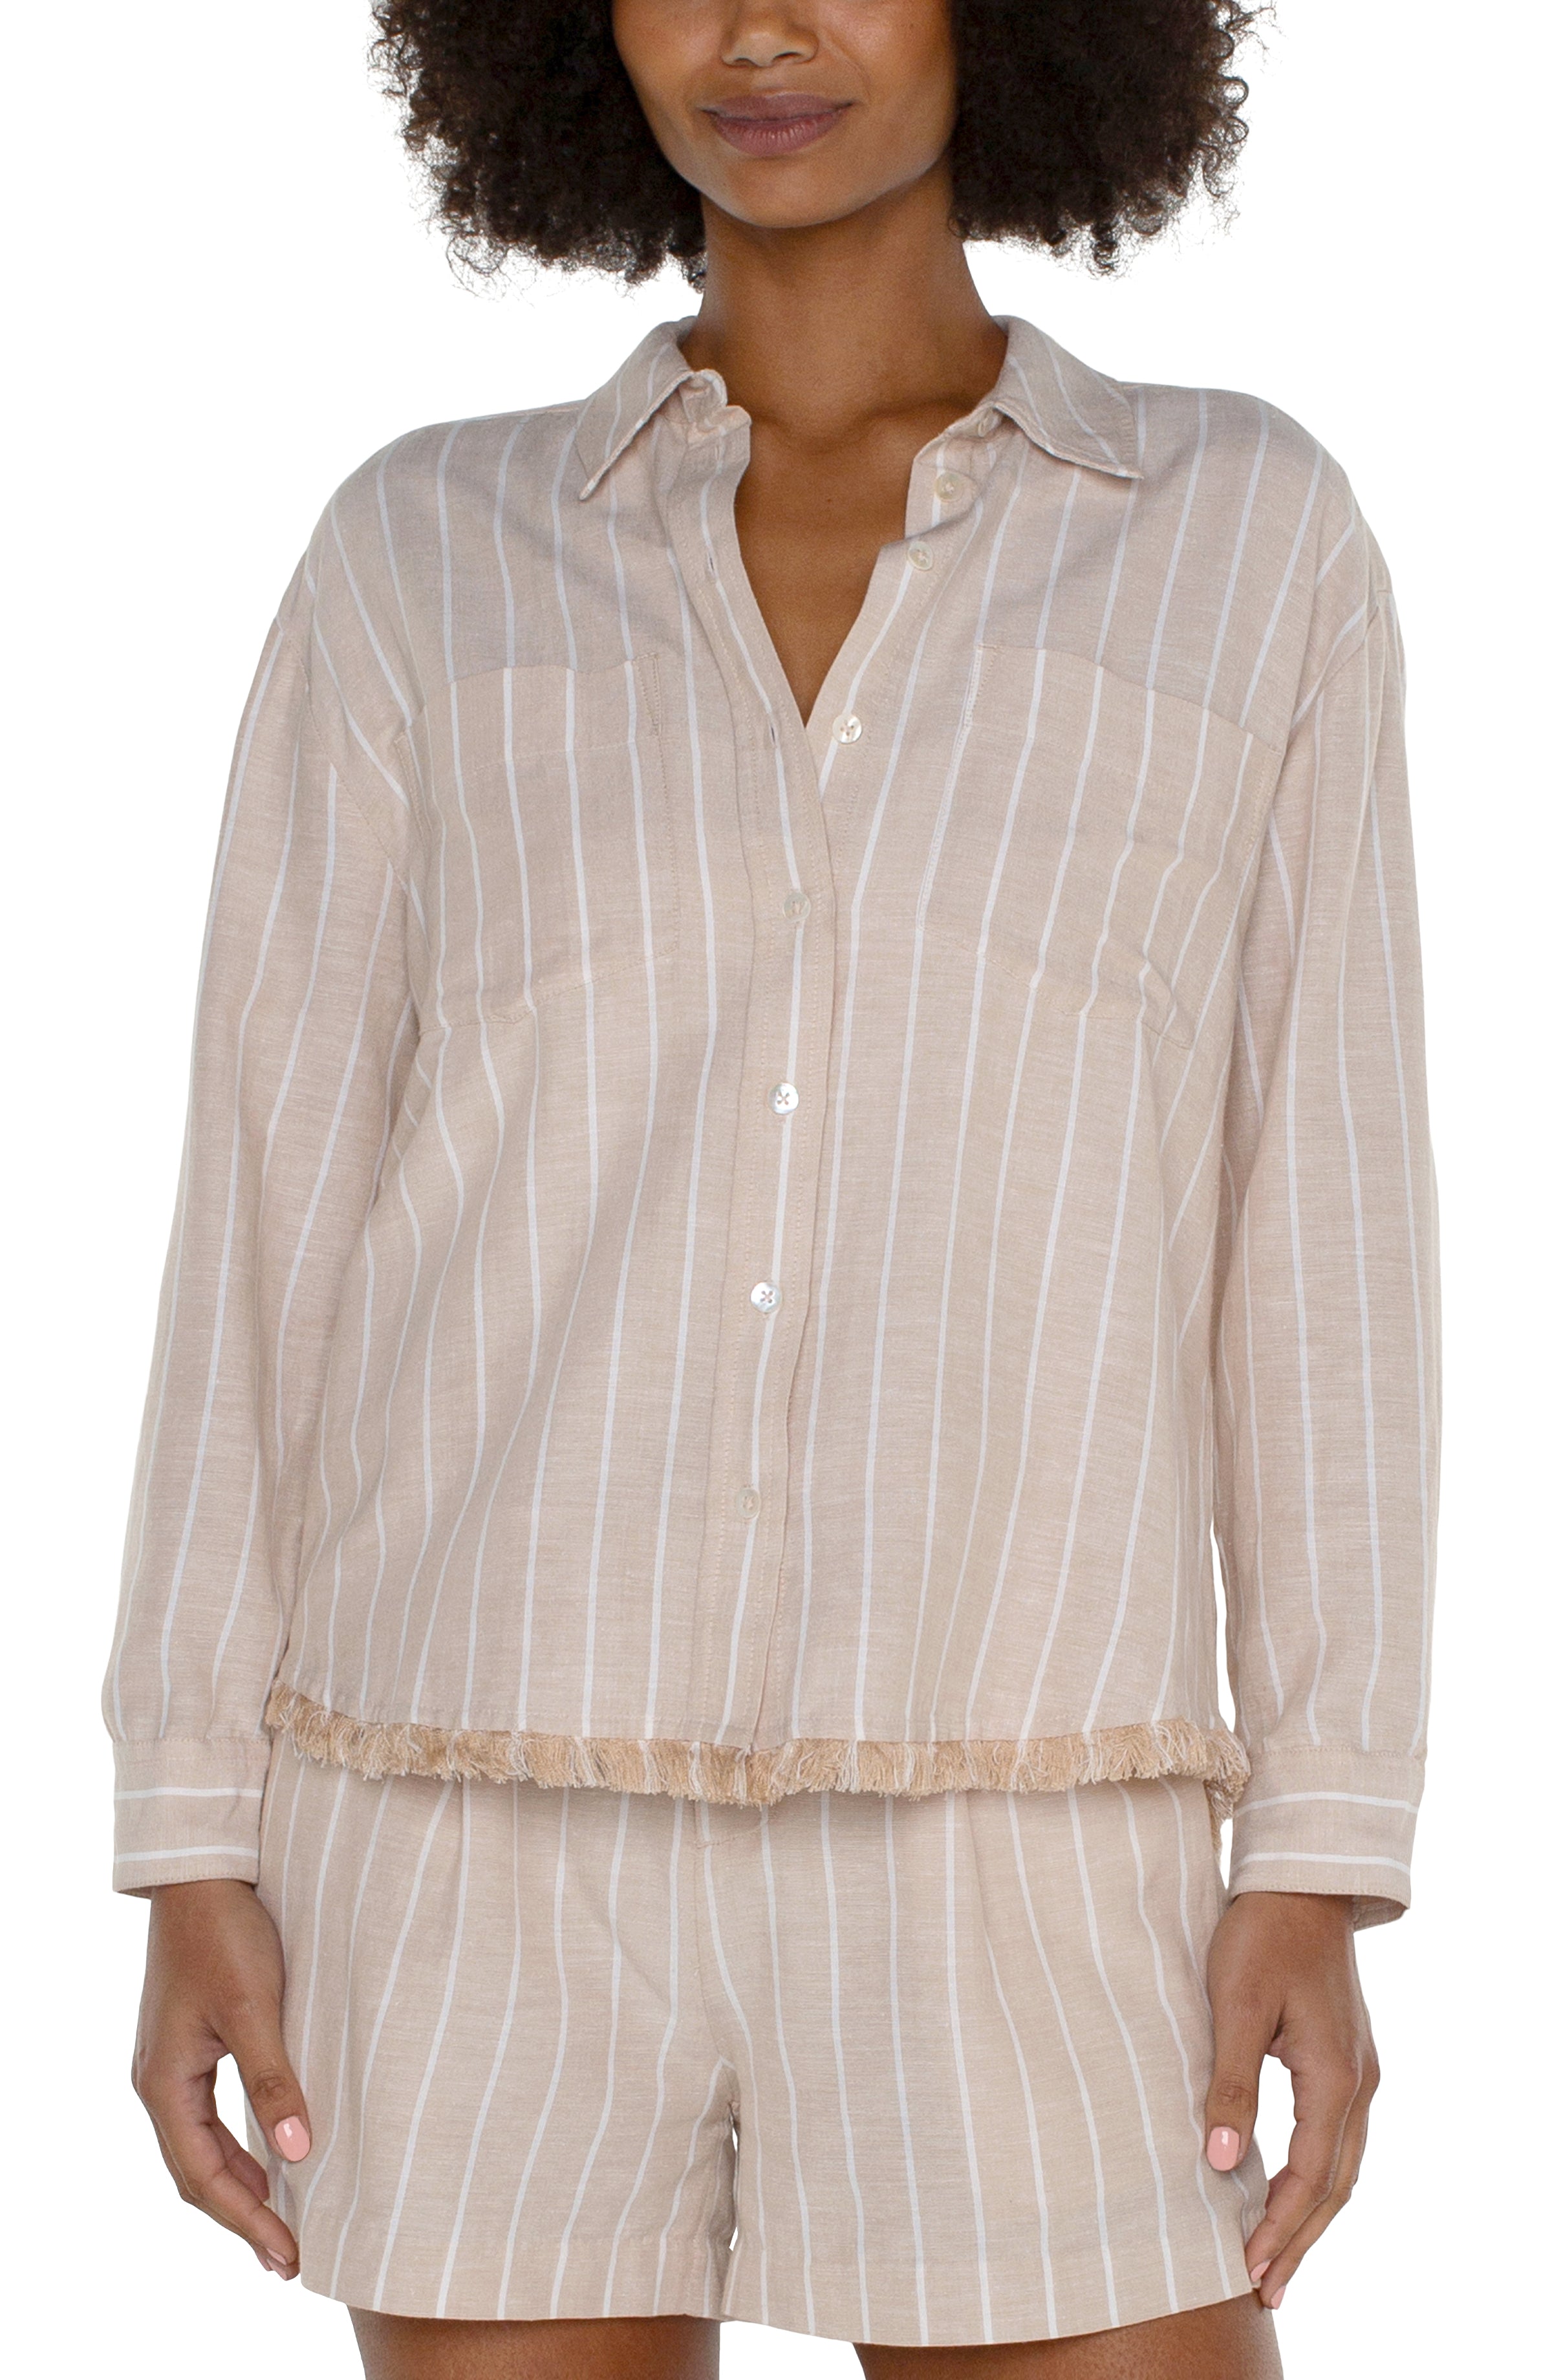 LVP Long Sleeve Button Front Shirt with Fray - Tan Yarn Dyed Stripe Closed Front View